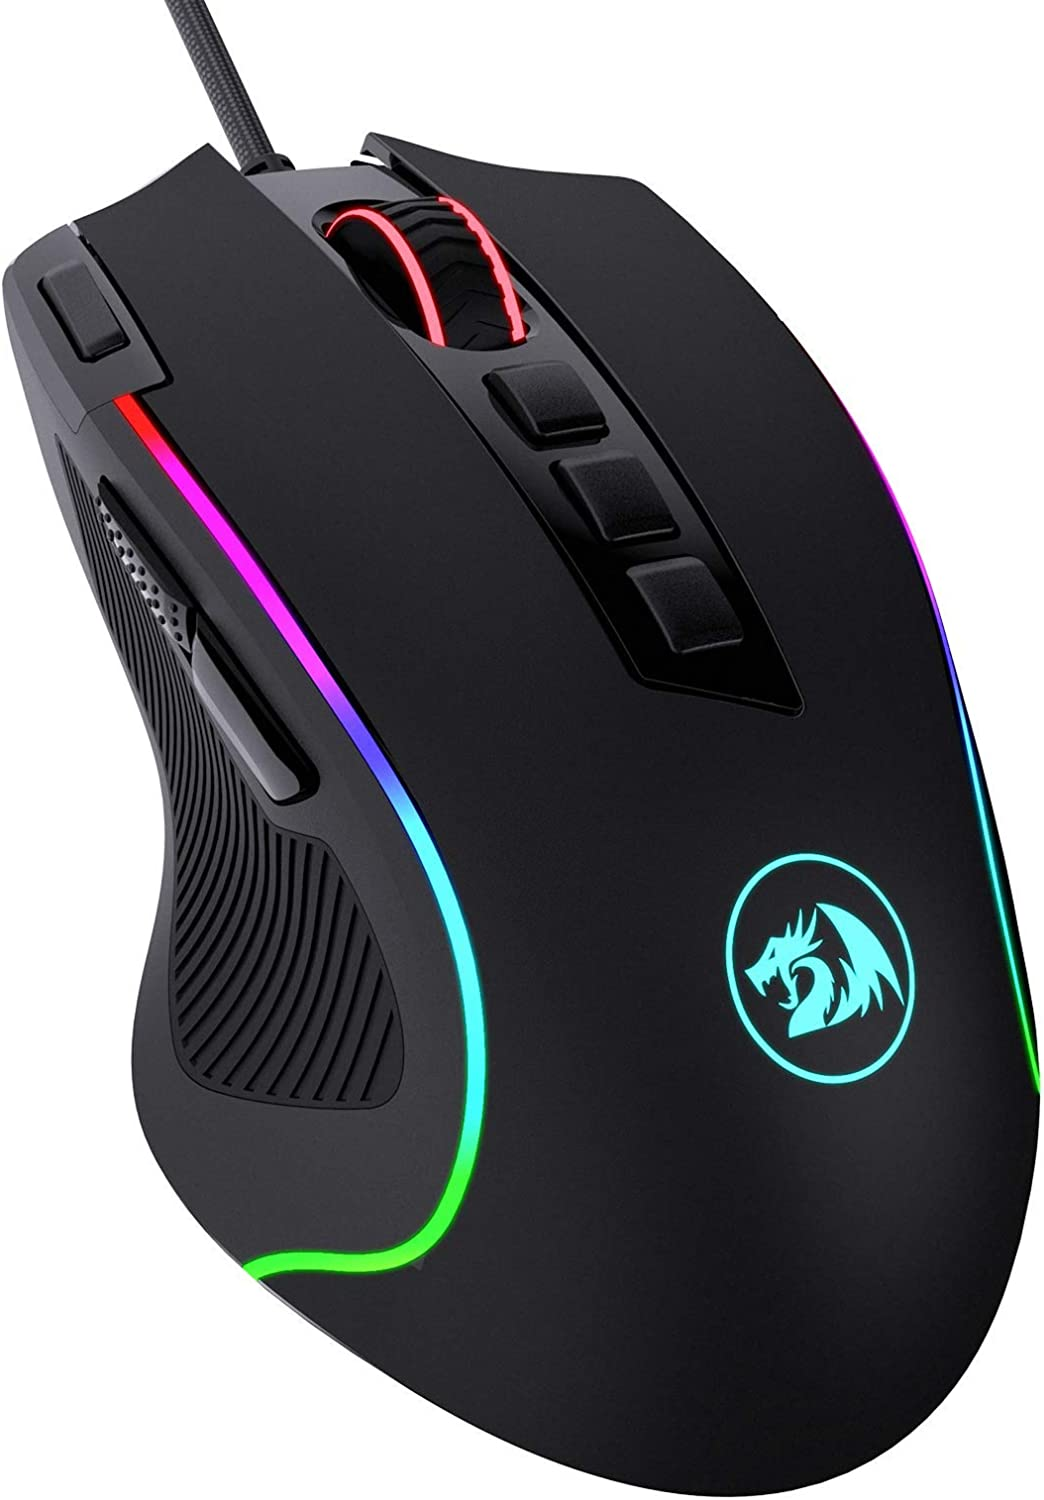 An ergonomic gaming mouse is designed for a gamer to be more comfortable while gaming for extended periods of time.